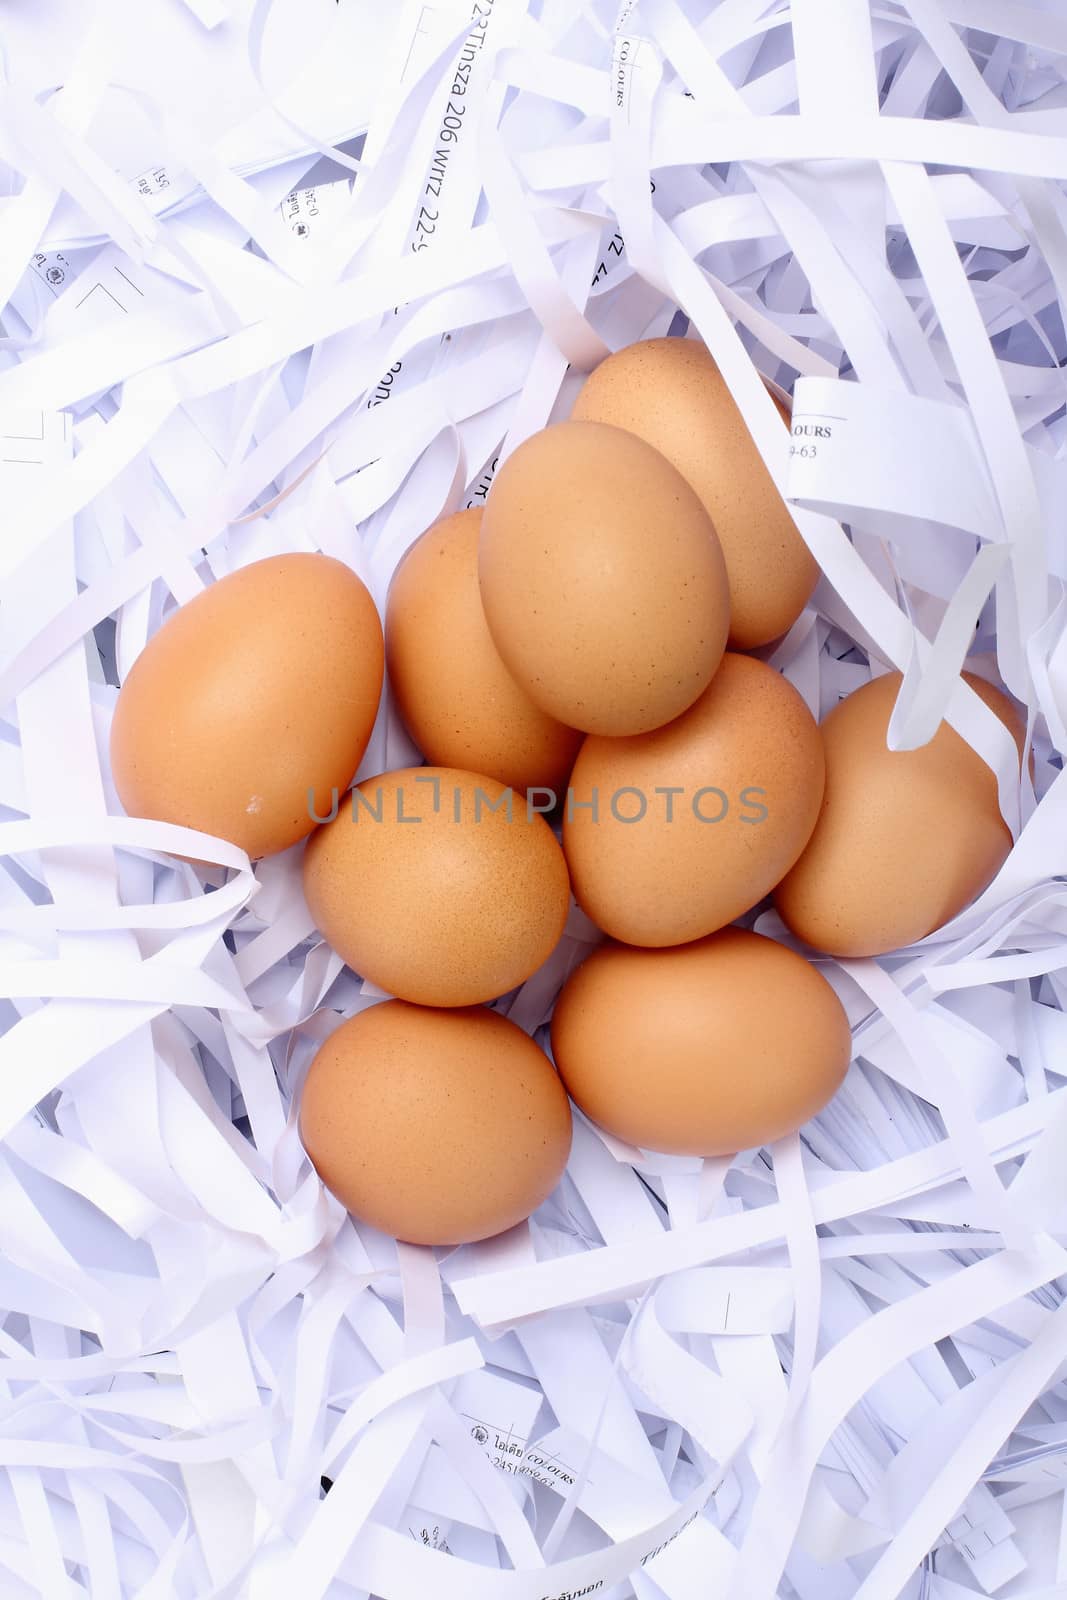 eggs on papers cut background by myrainjom01